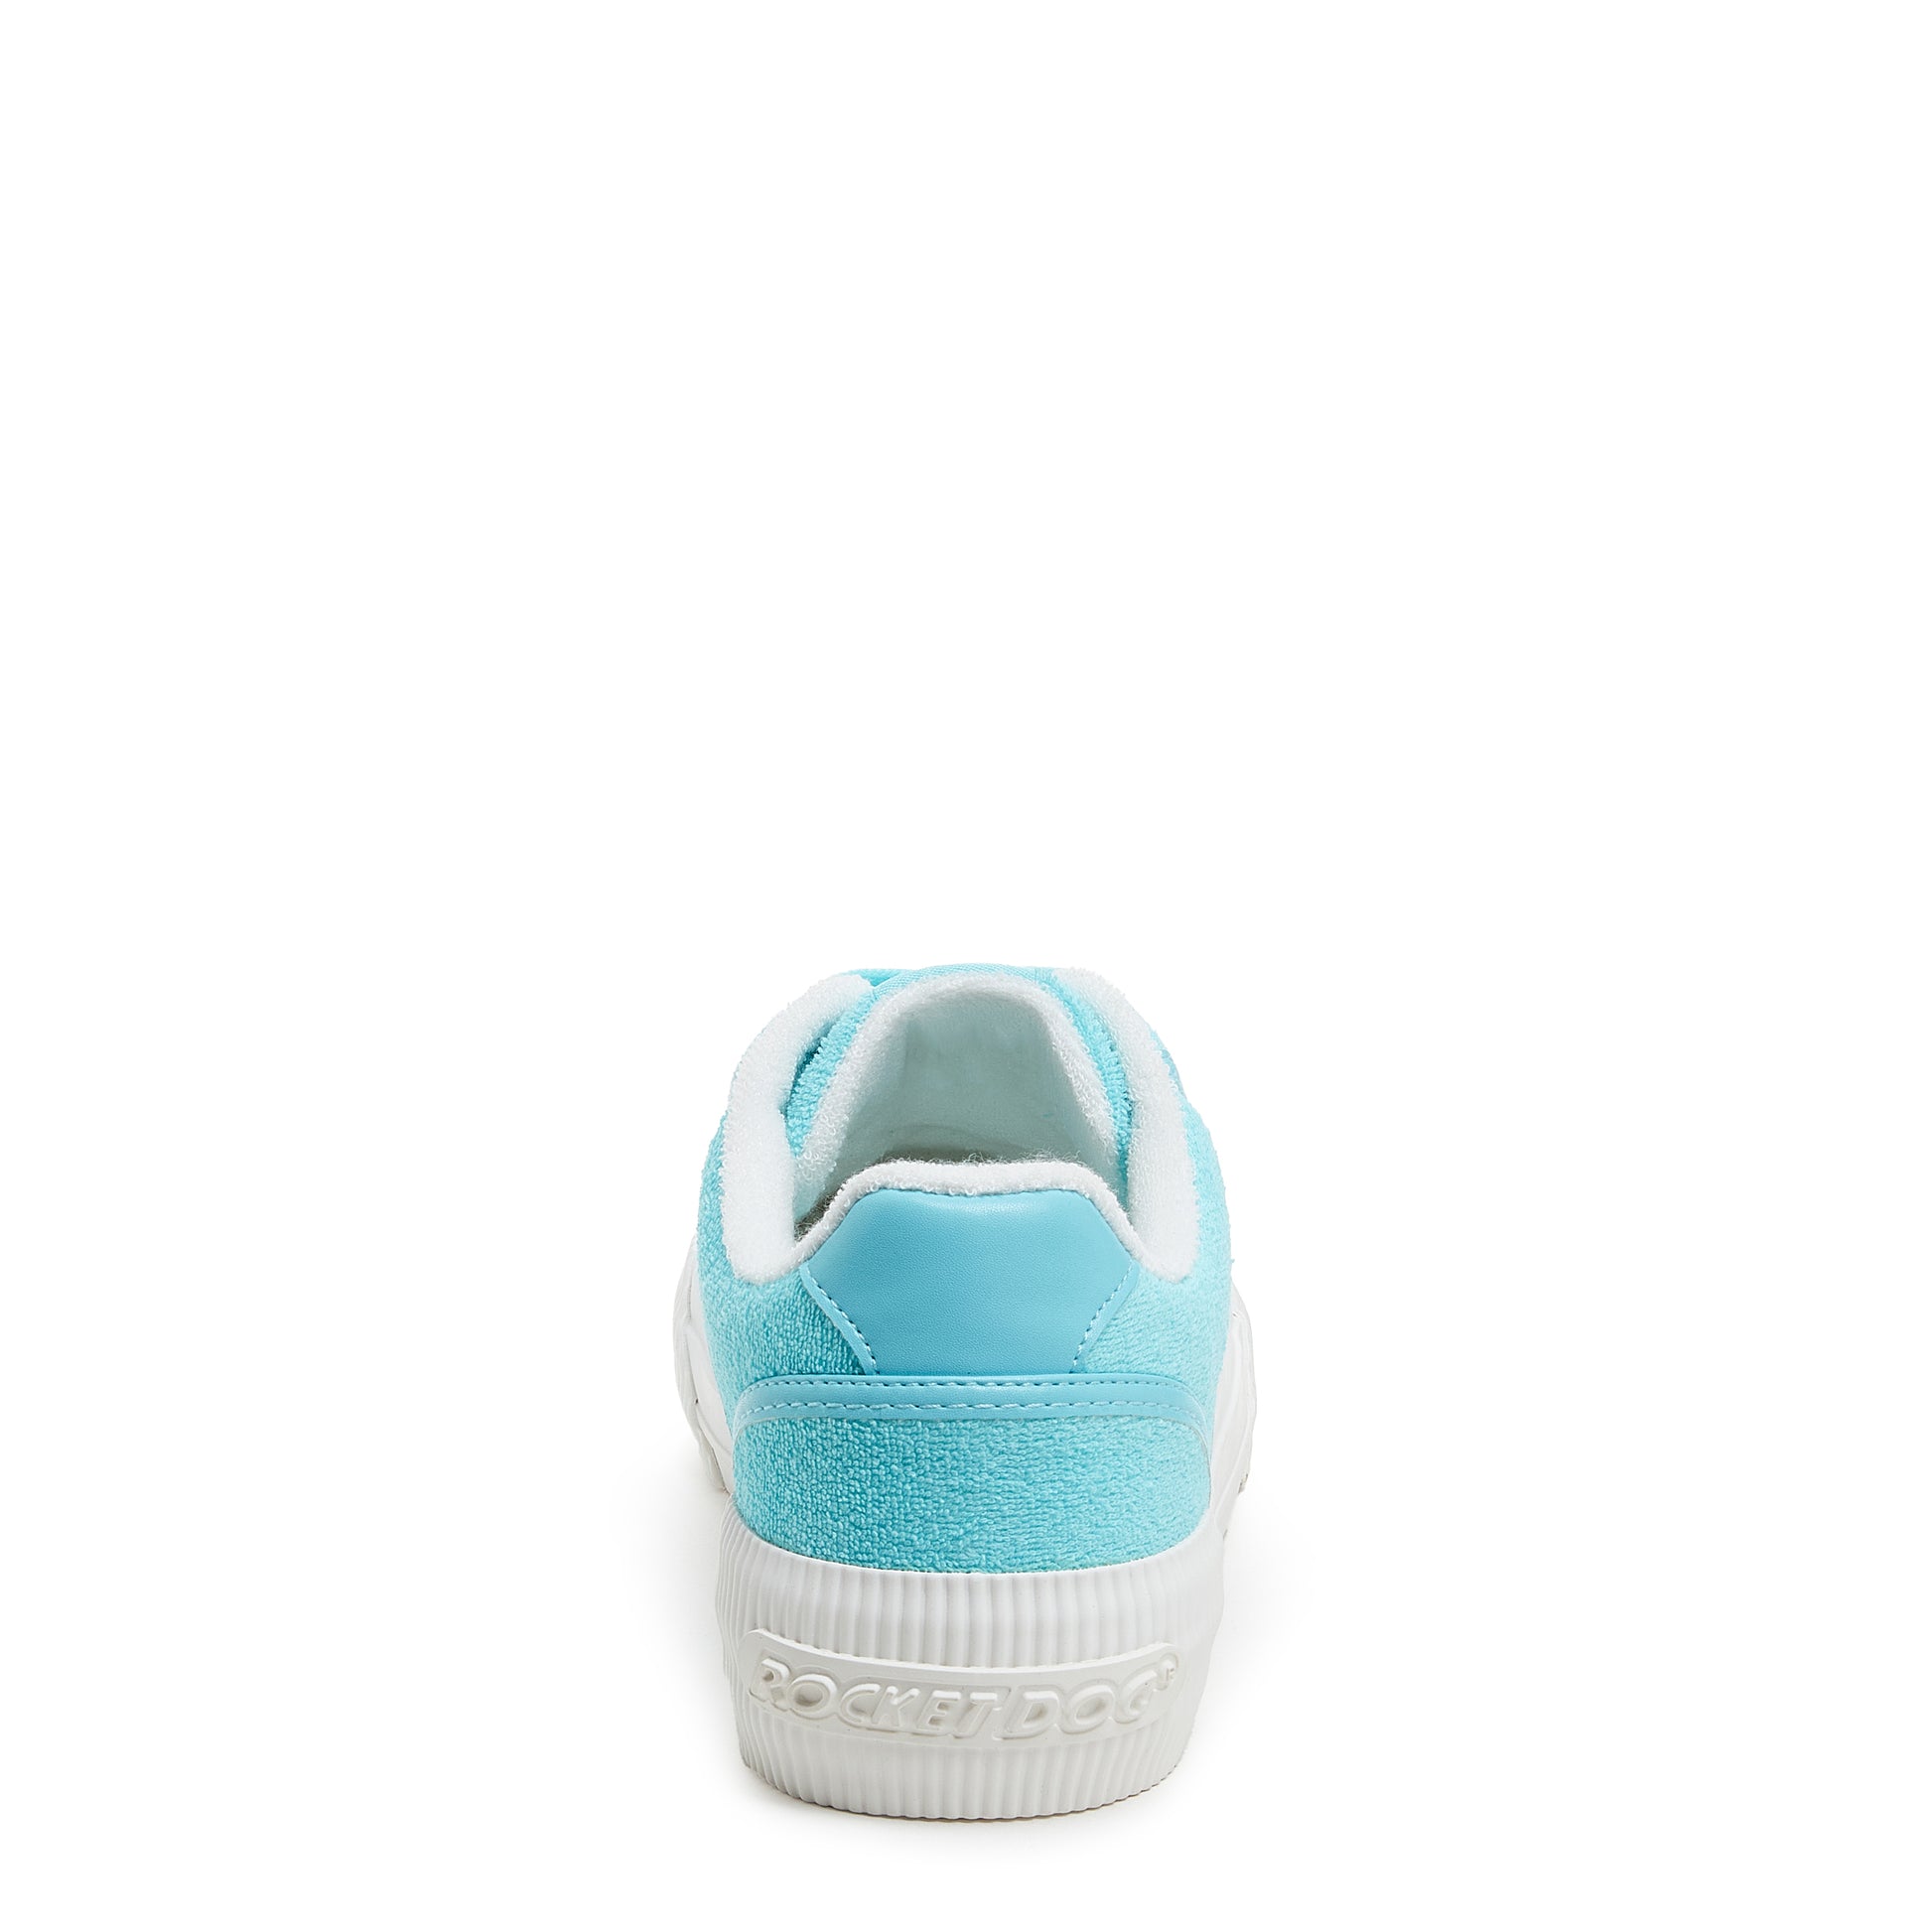 Rocket Dog® Cheery Turquoise Terry Sneakers - Breezy Lift